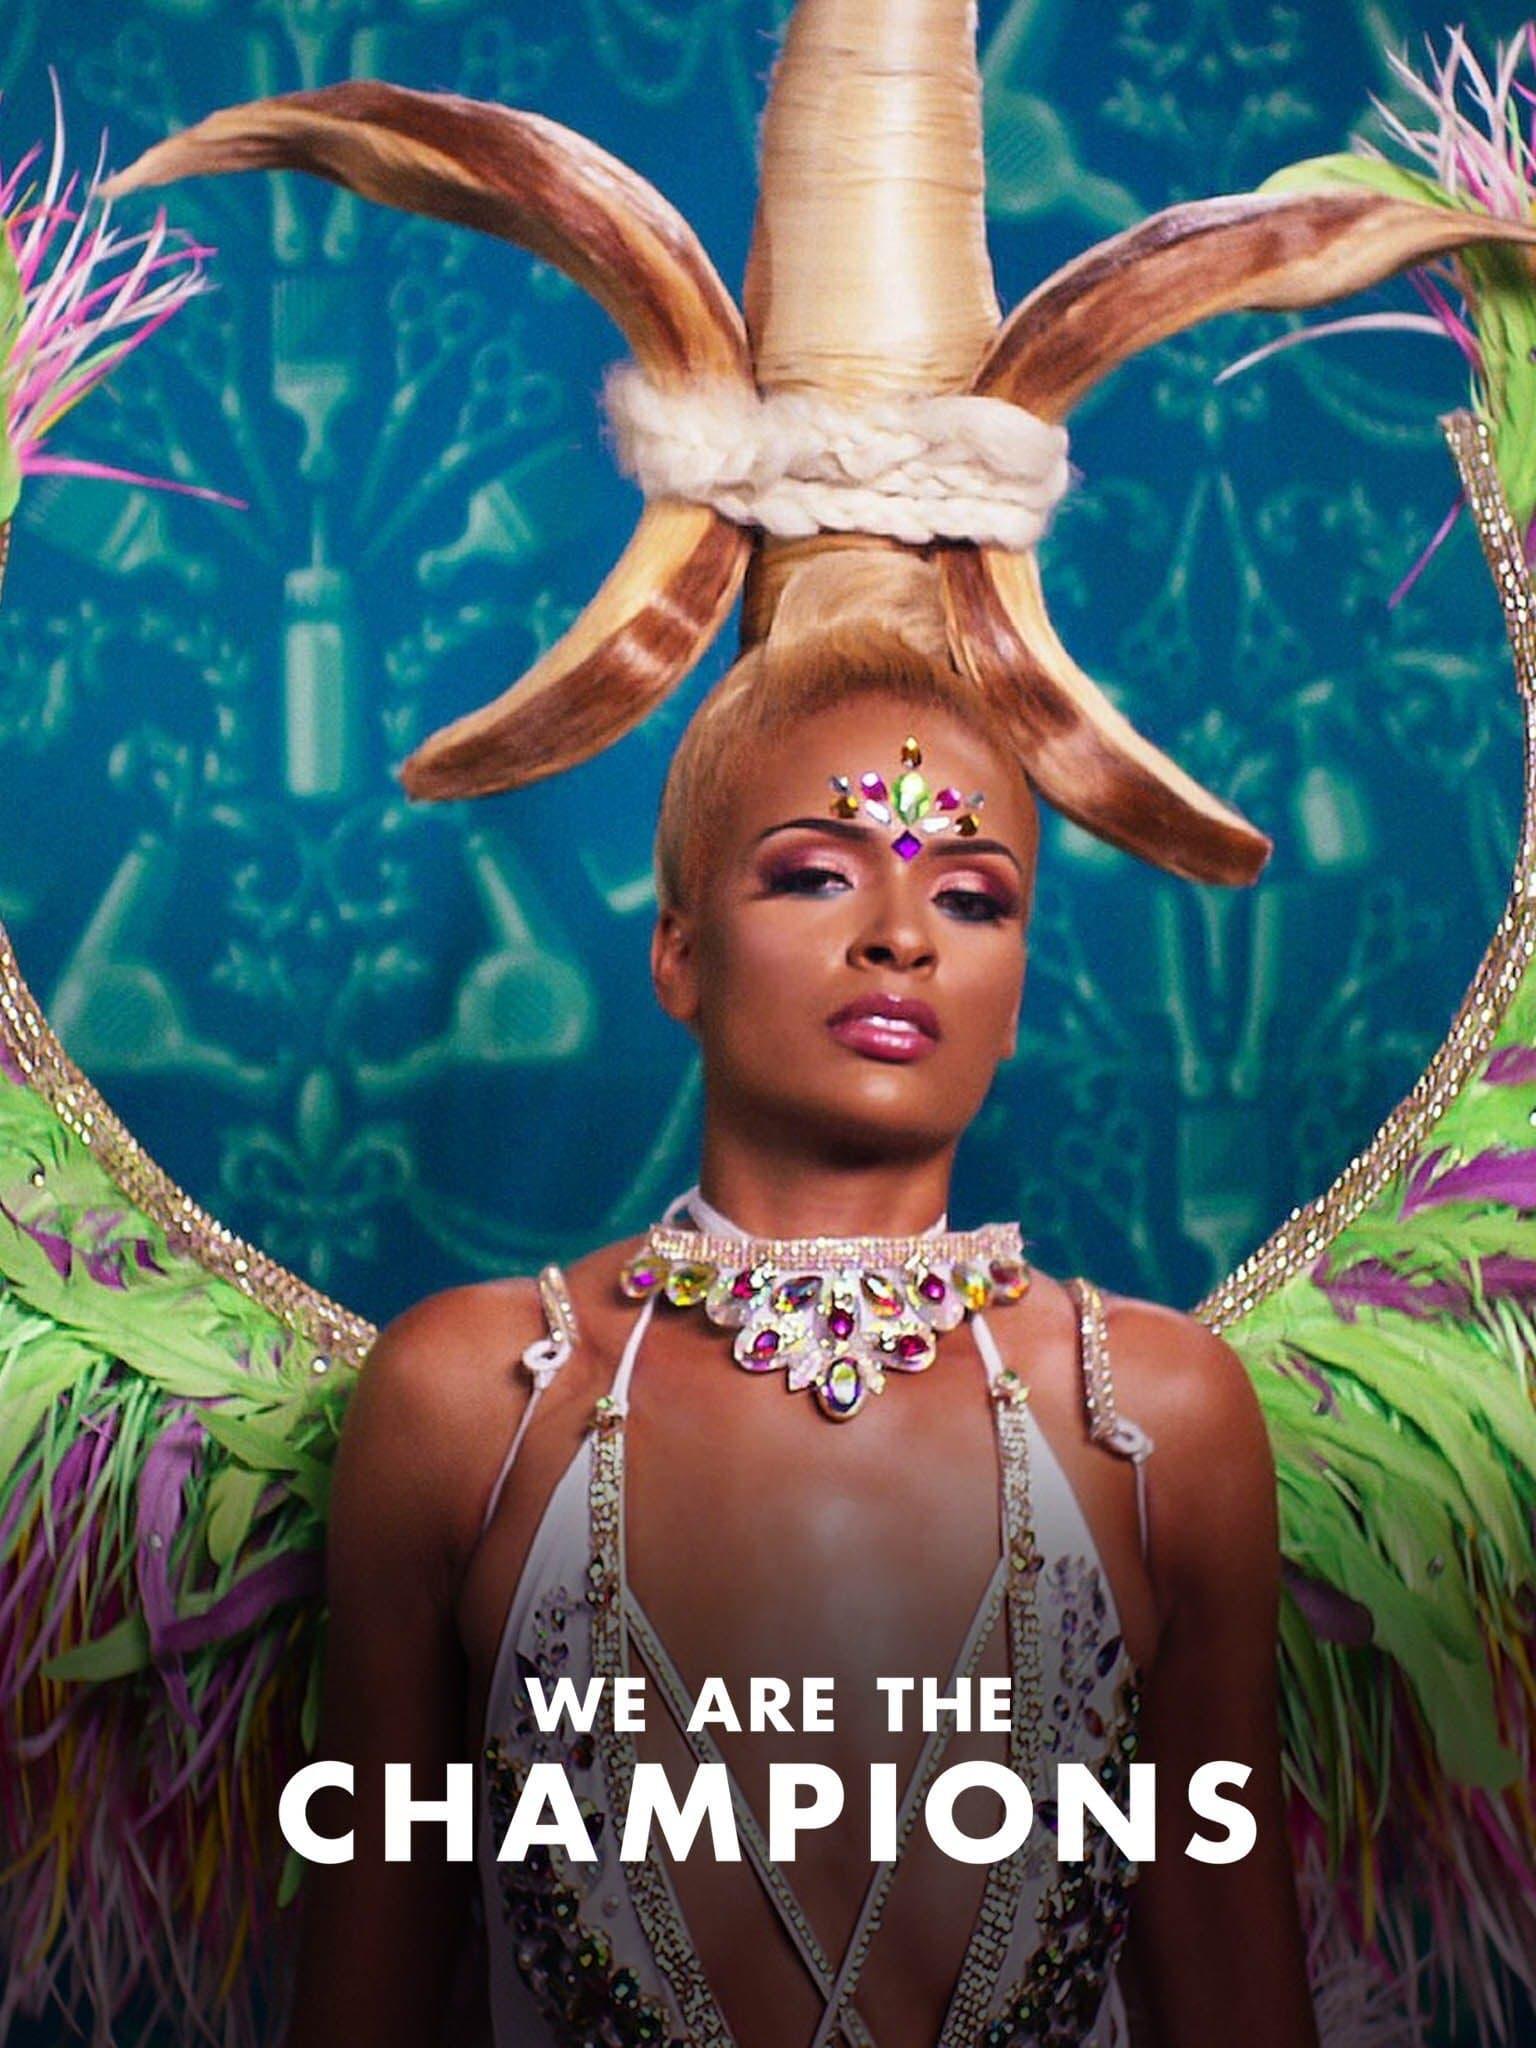 We Are the Champions poster